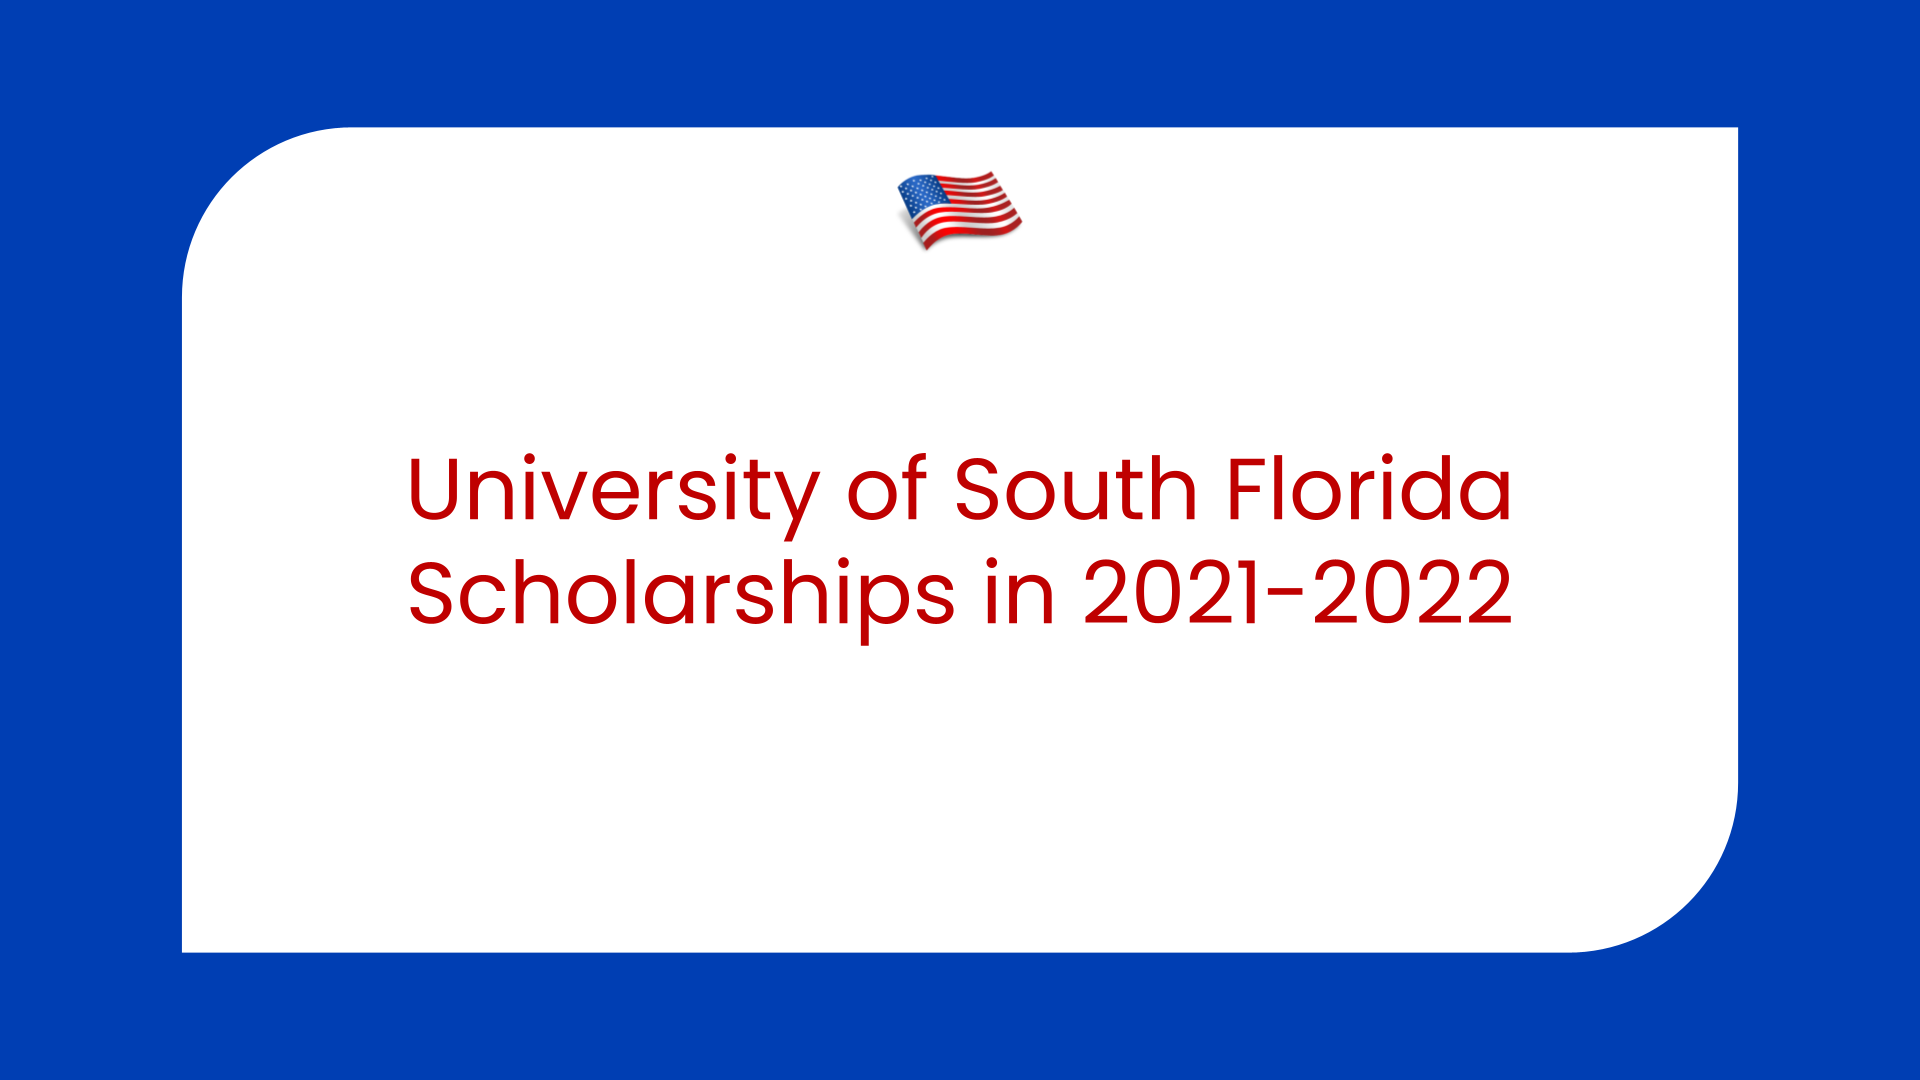 University of South Florida Scholarships in the USA in 2021-2022